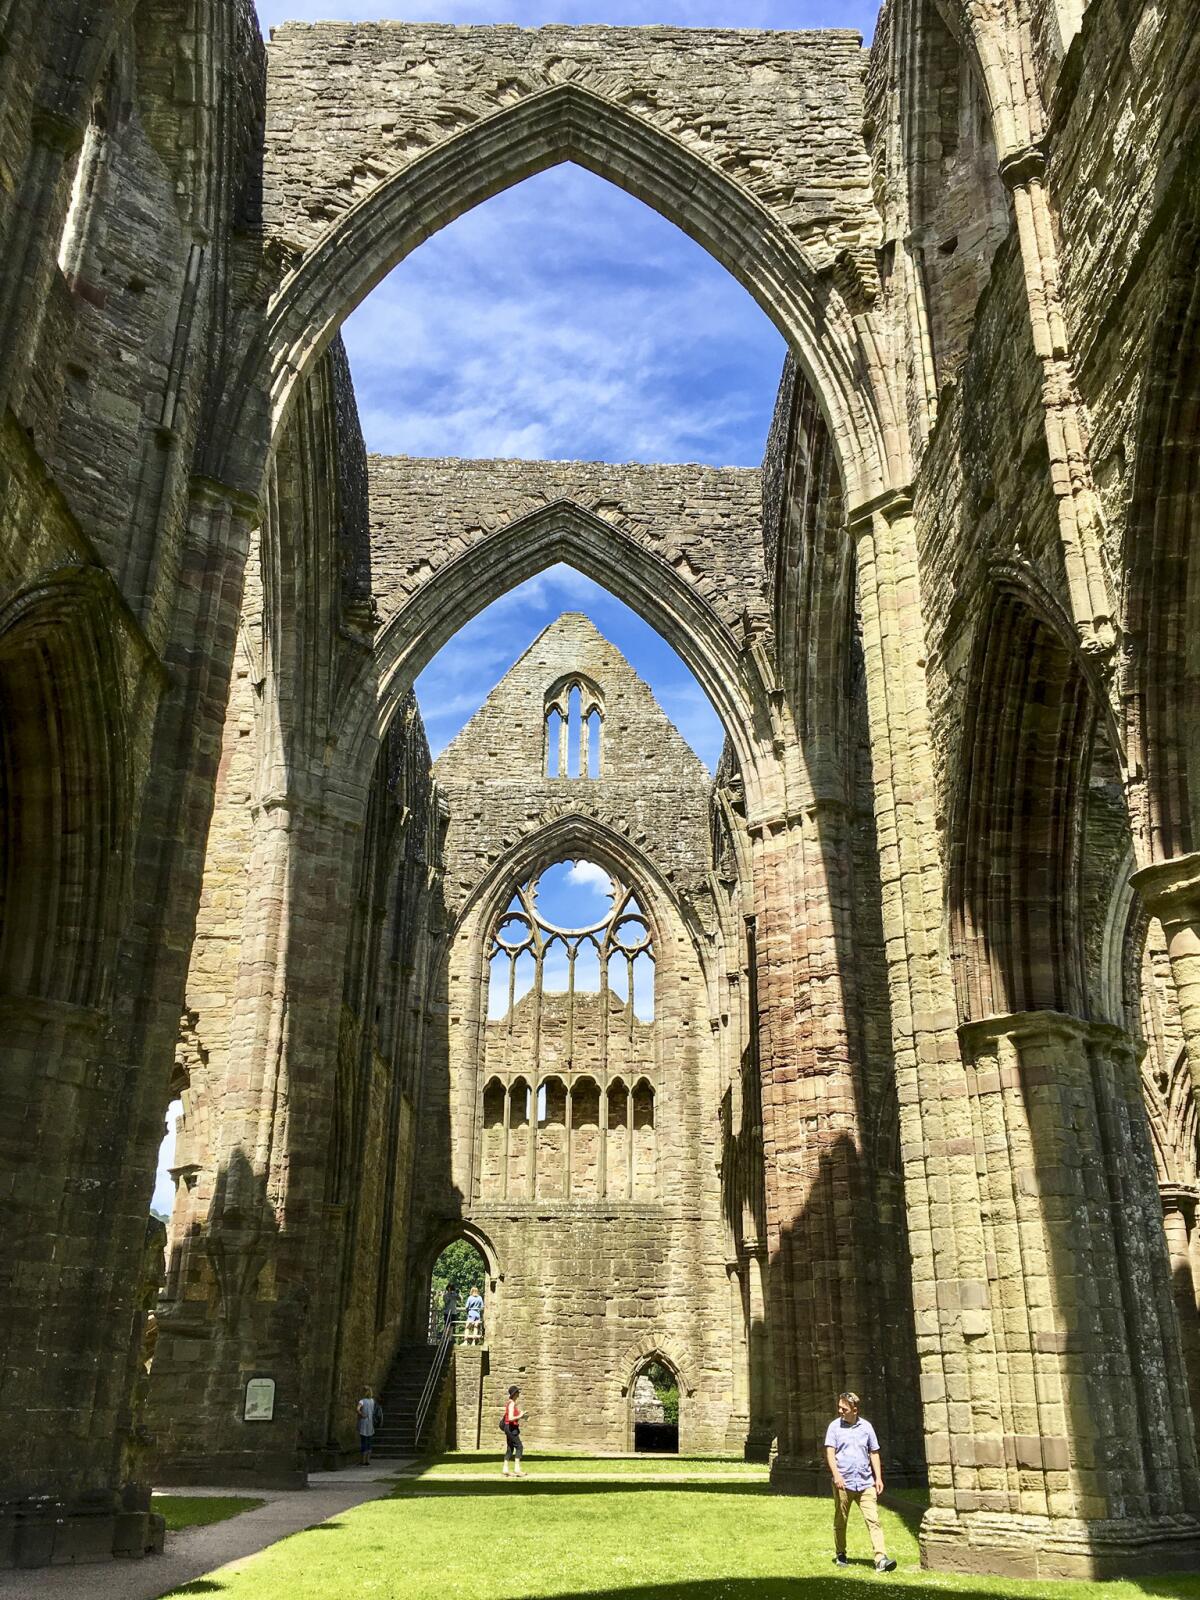 Tintern Abbey, one of Wales' greatest monastic ruins, was founded by the lord of nearby Chepstow Castle in 1131 and completed around 1300. It stands today much as it did then, except for the lack of a roof and windows.